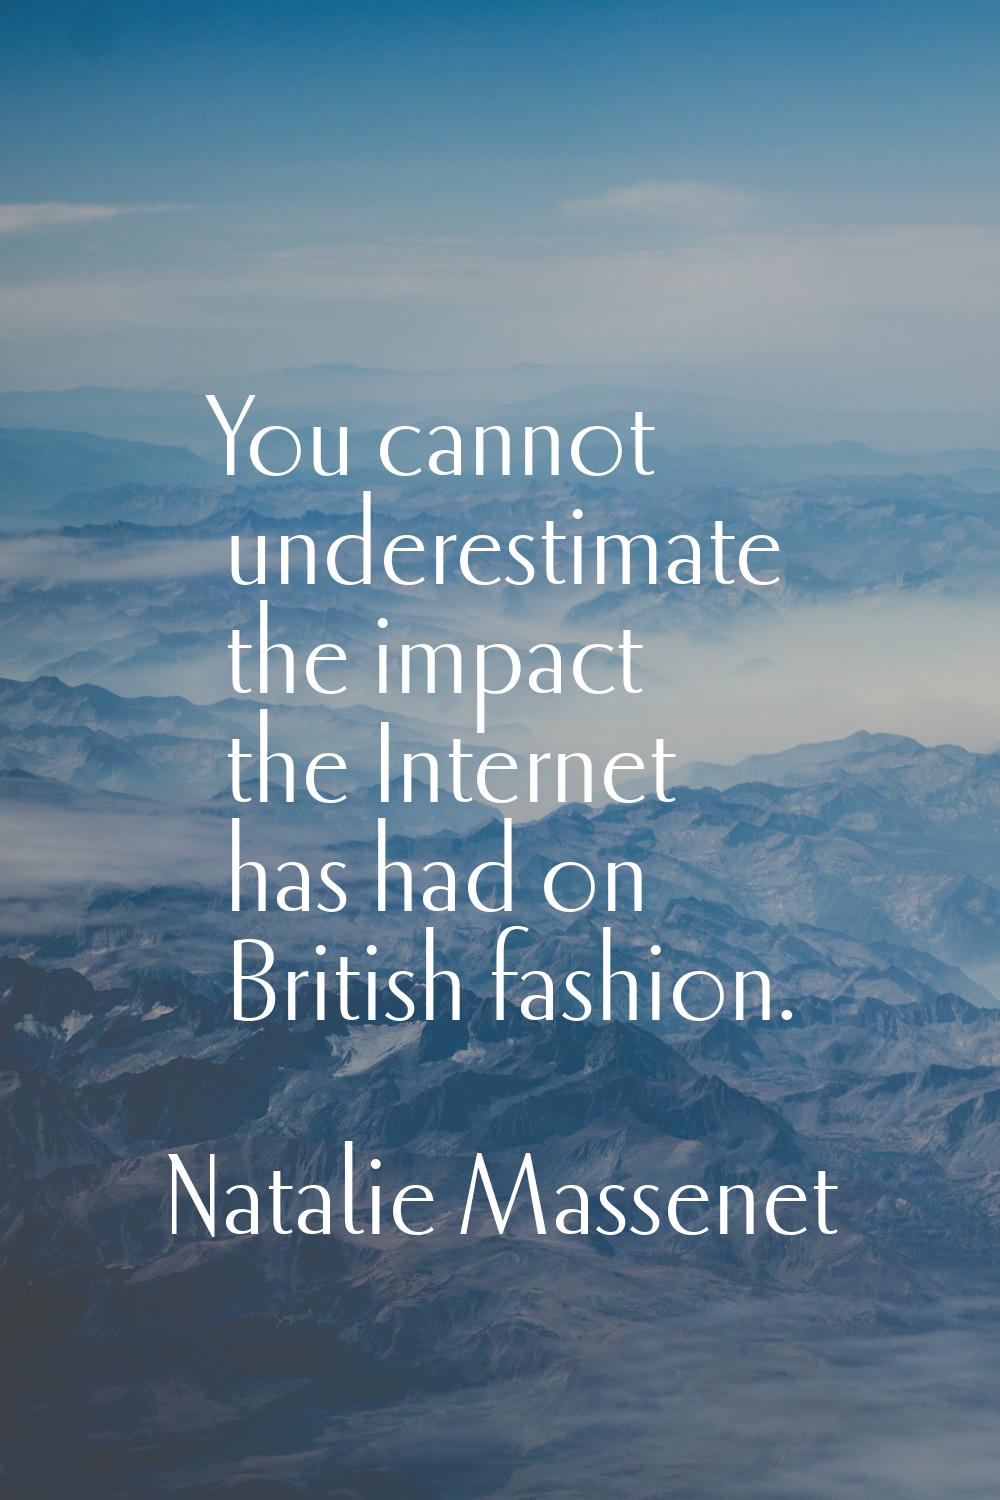 You cannot underestimate the impact the Internet has had on British fashion.